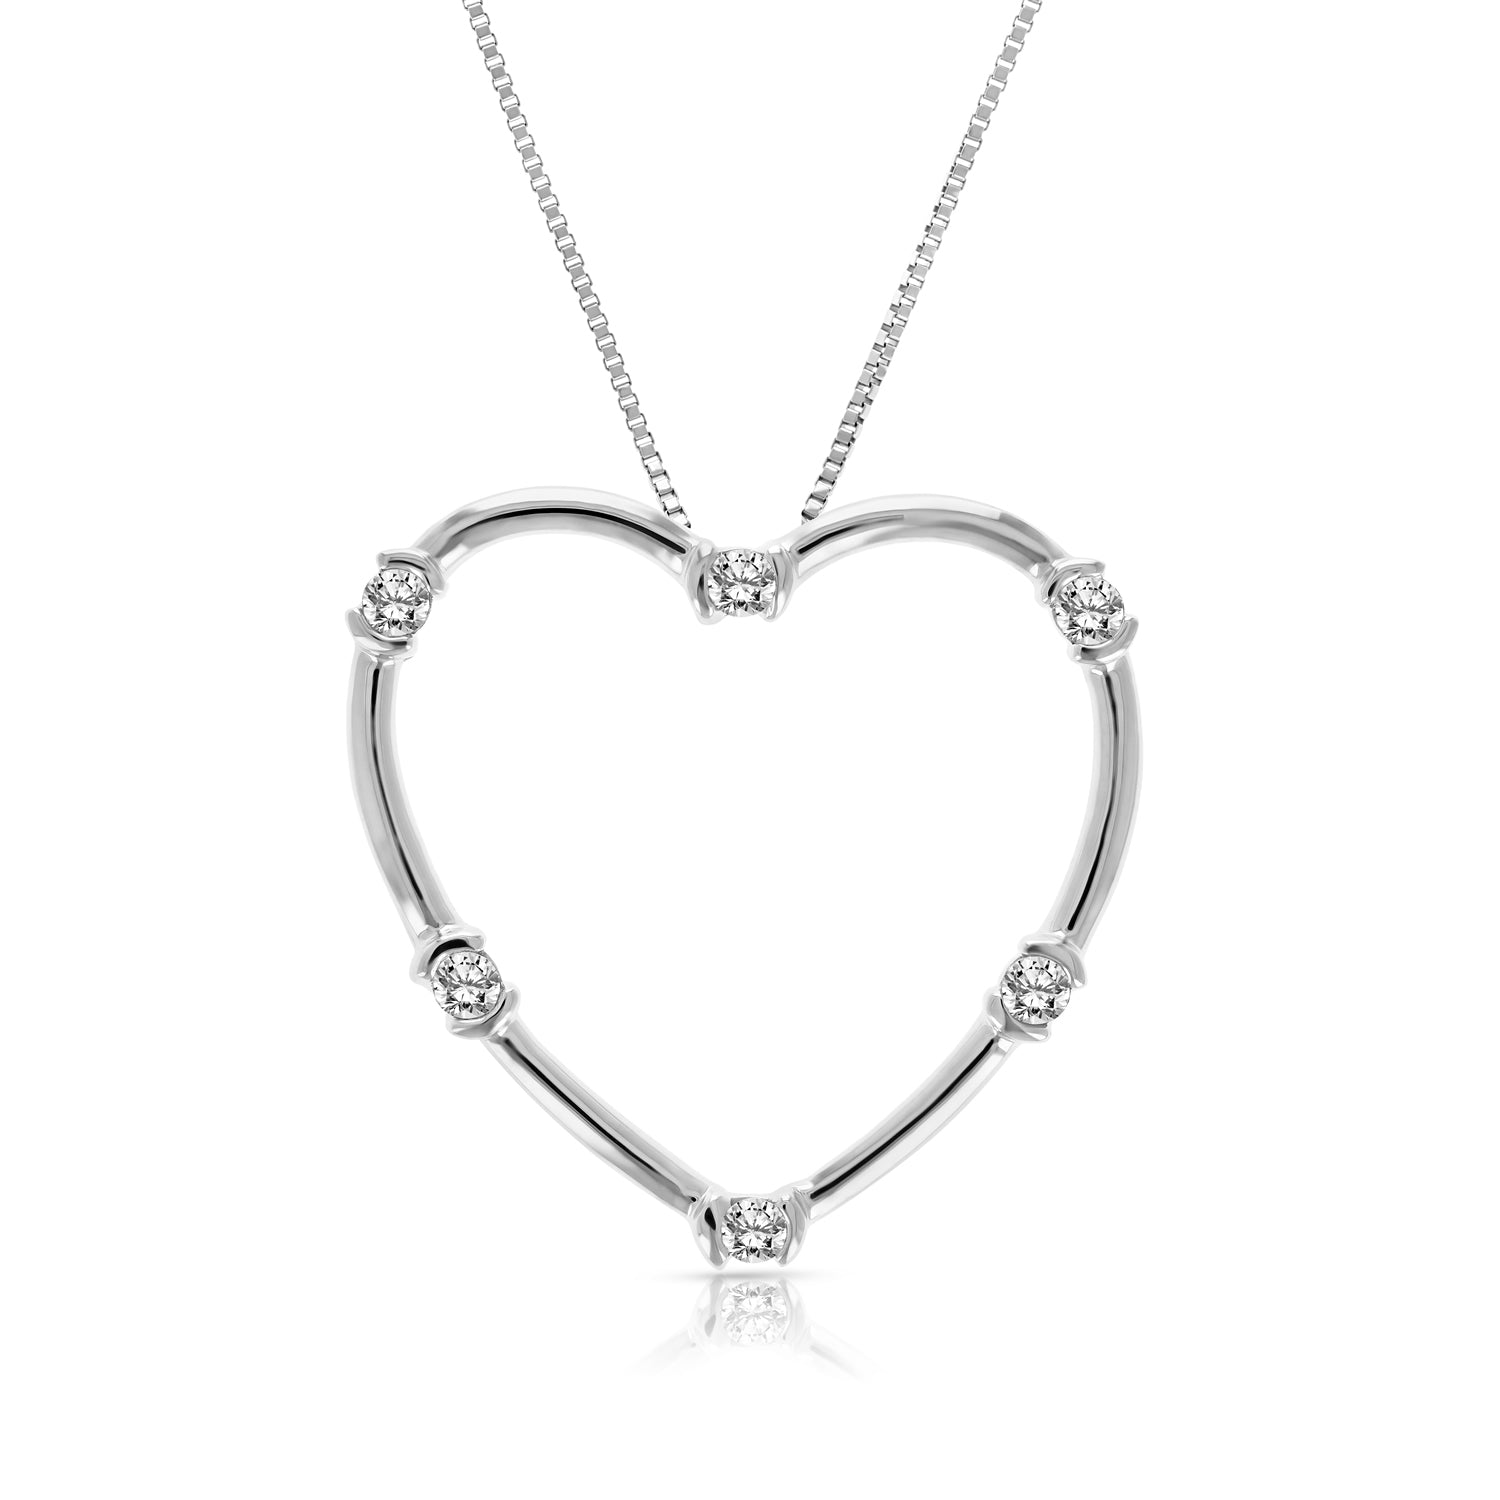 1/5 cttw Diamond Heart Pendant Necklace 10K White Gold with 18 Inch Chain